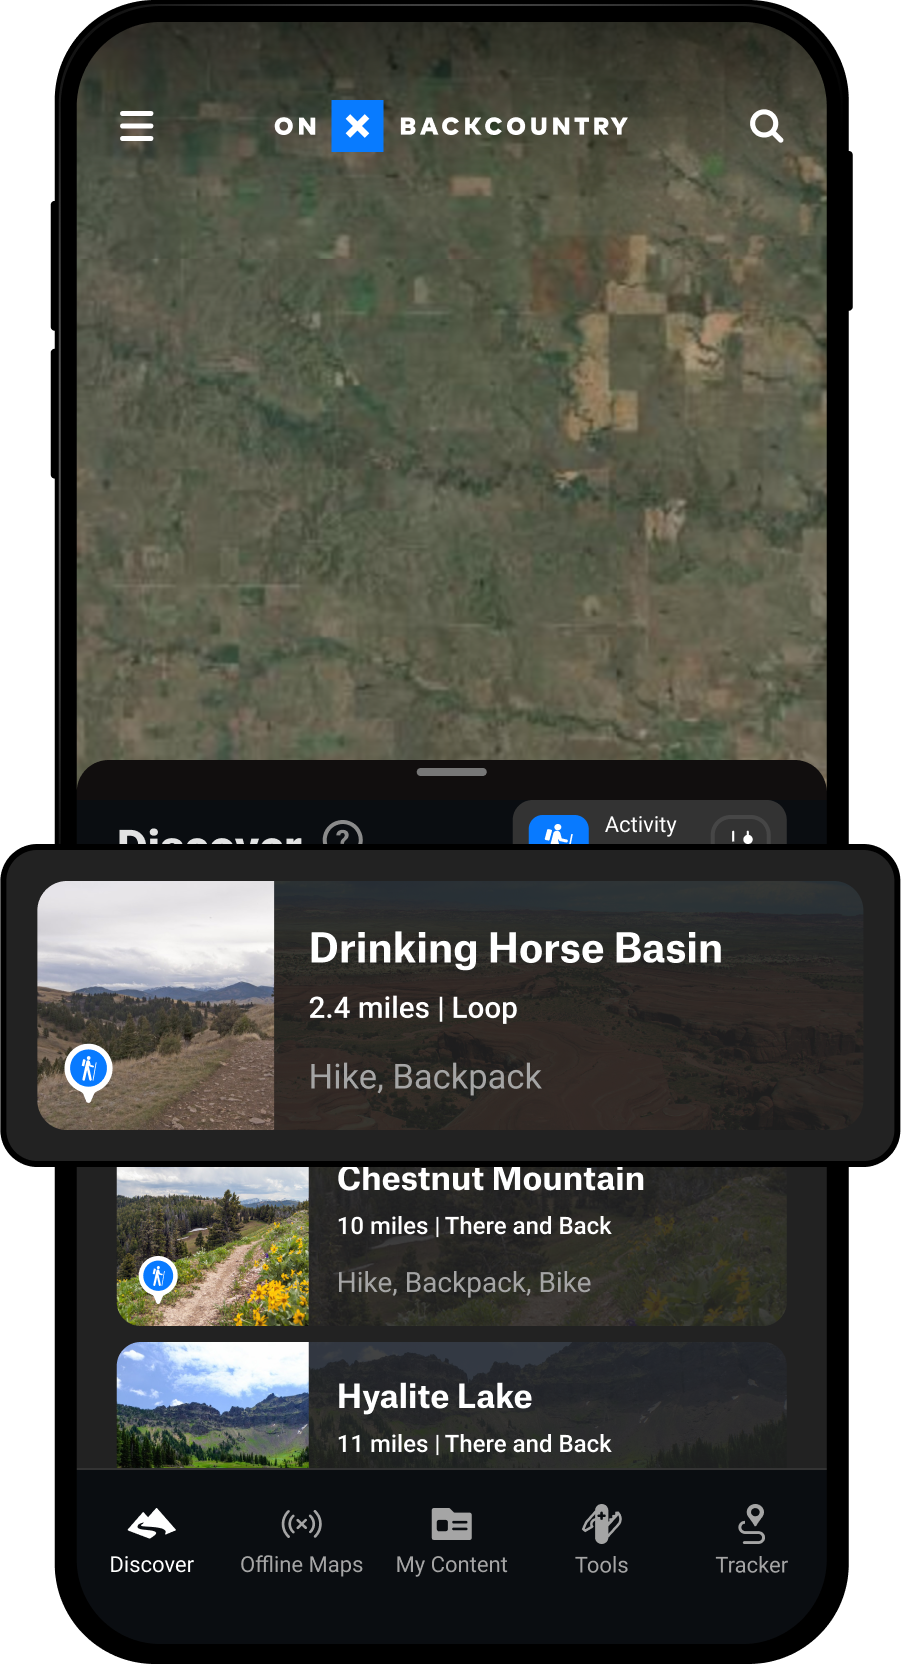 Hiking Trail Discover Menu Backcountry App.png